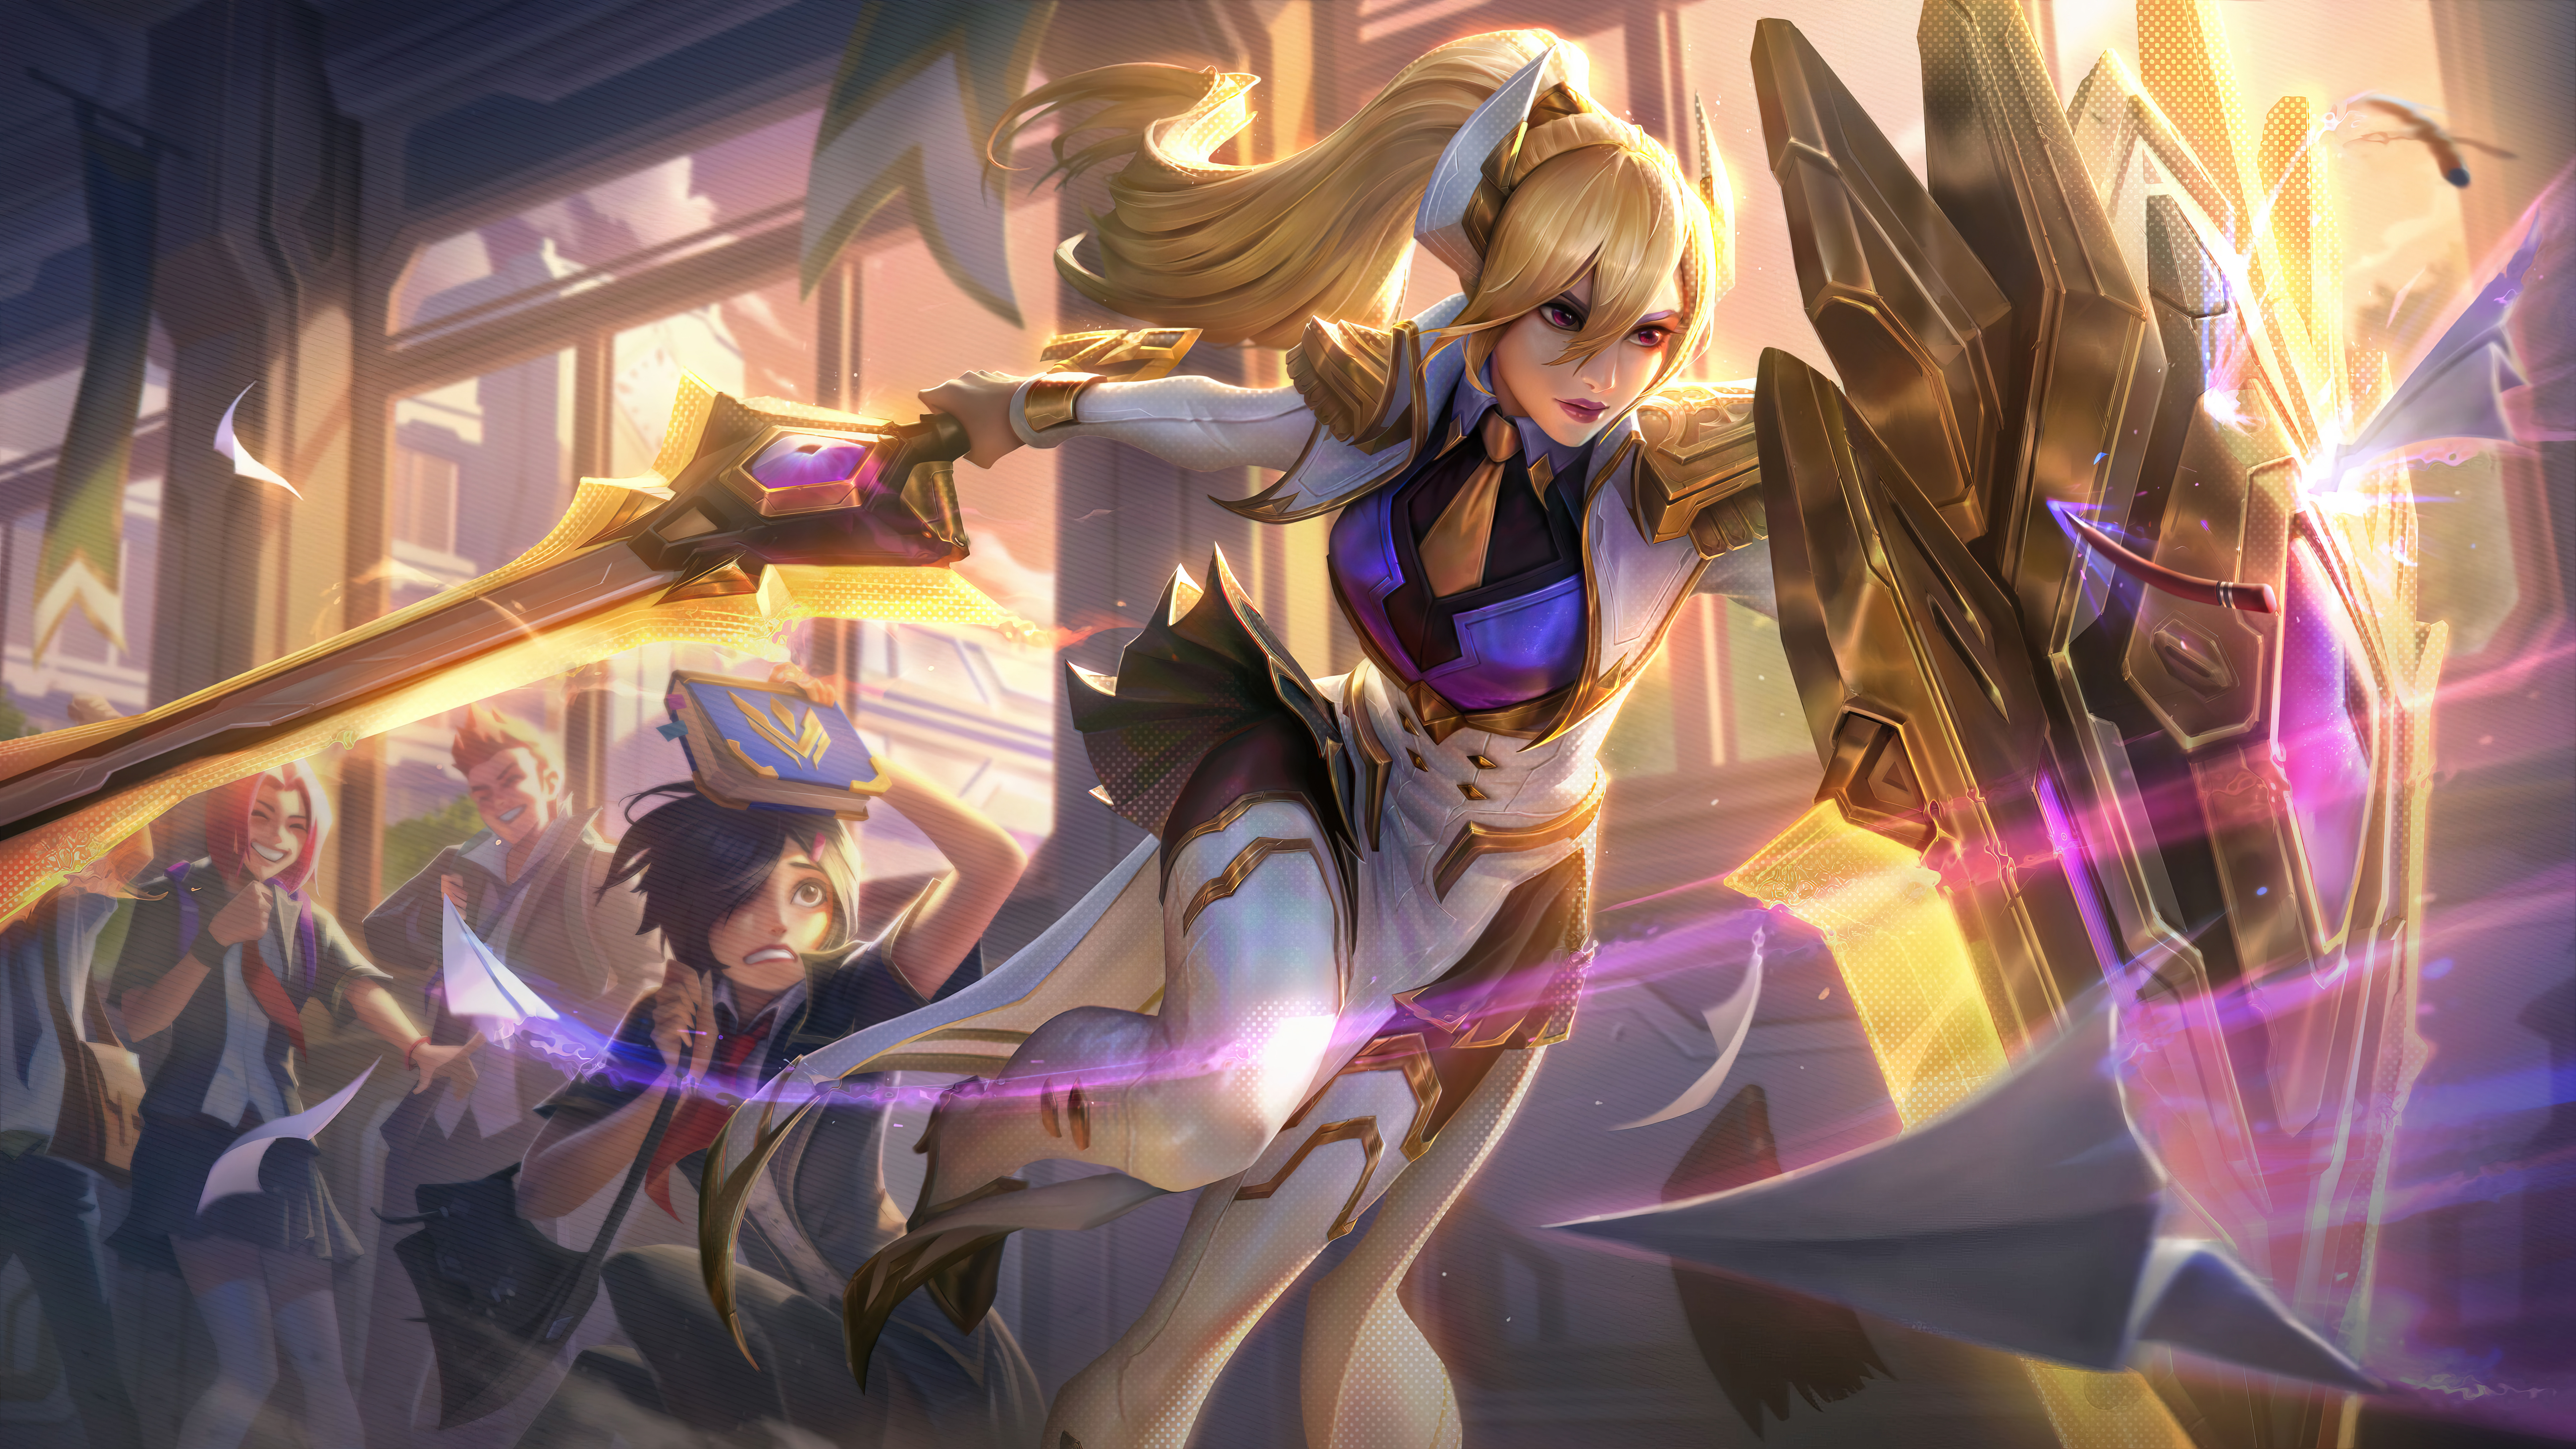 General 7680x4320 Leona (League of Legends) Battle Girl High School Battle Academia League of Legends Riot Games 4K shield school people GZG video game girls video game characters women with weapons women with swords blonde long hair tie red eyes lipstick PC gaming